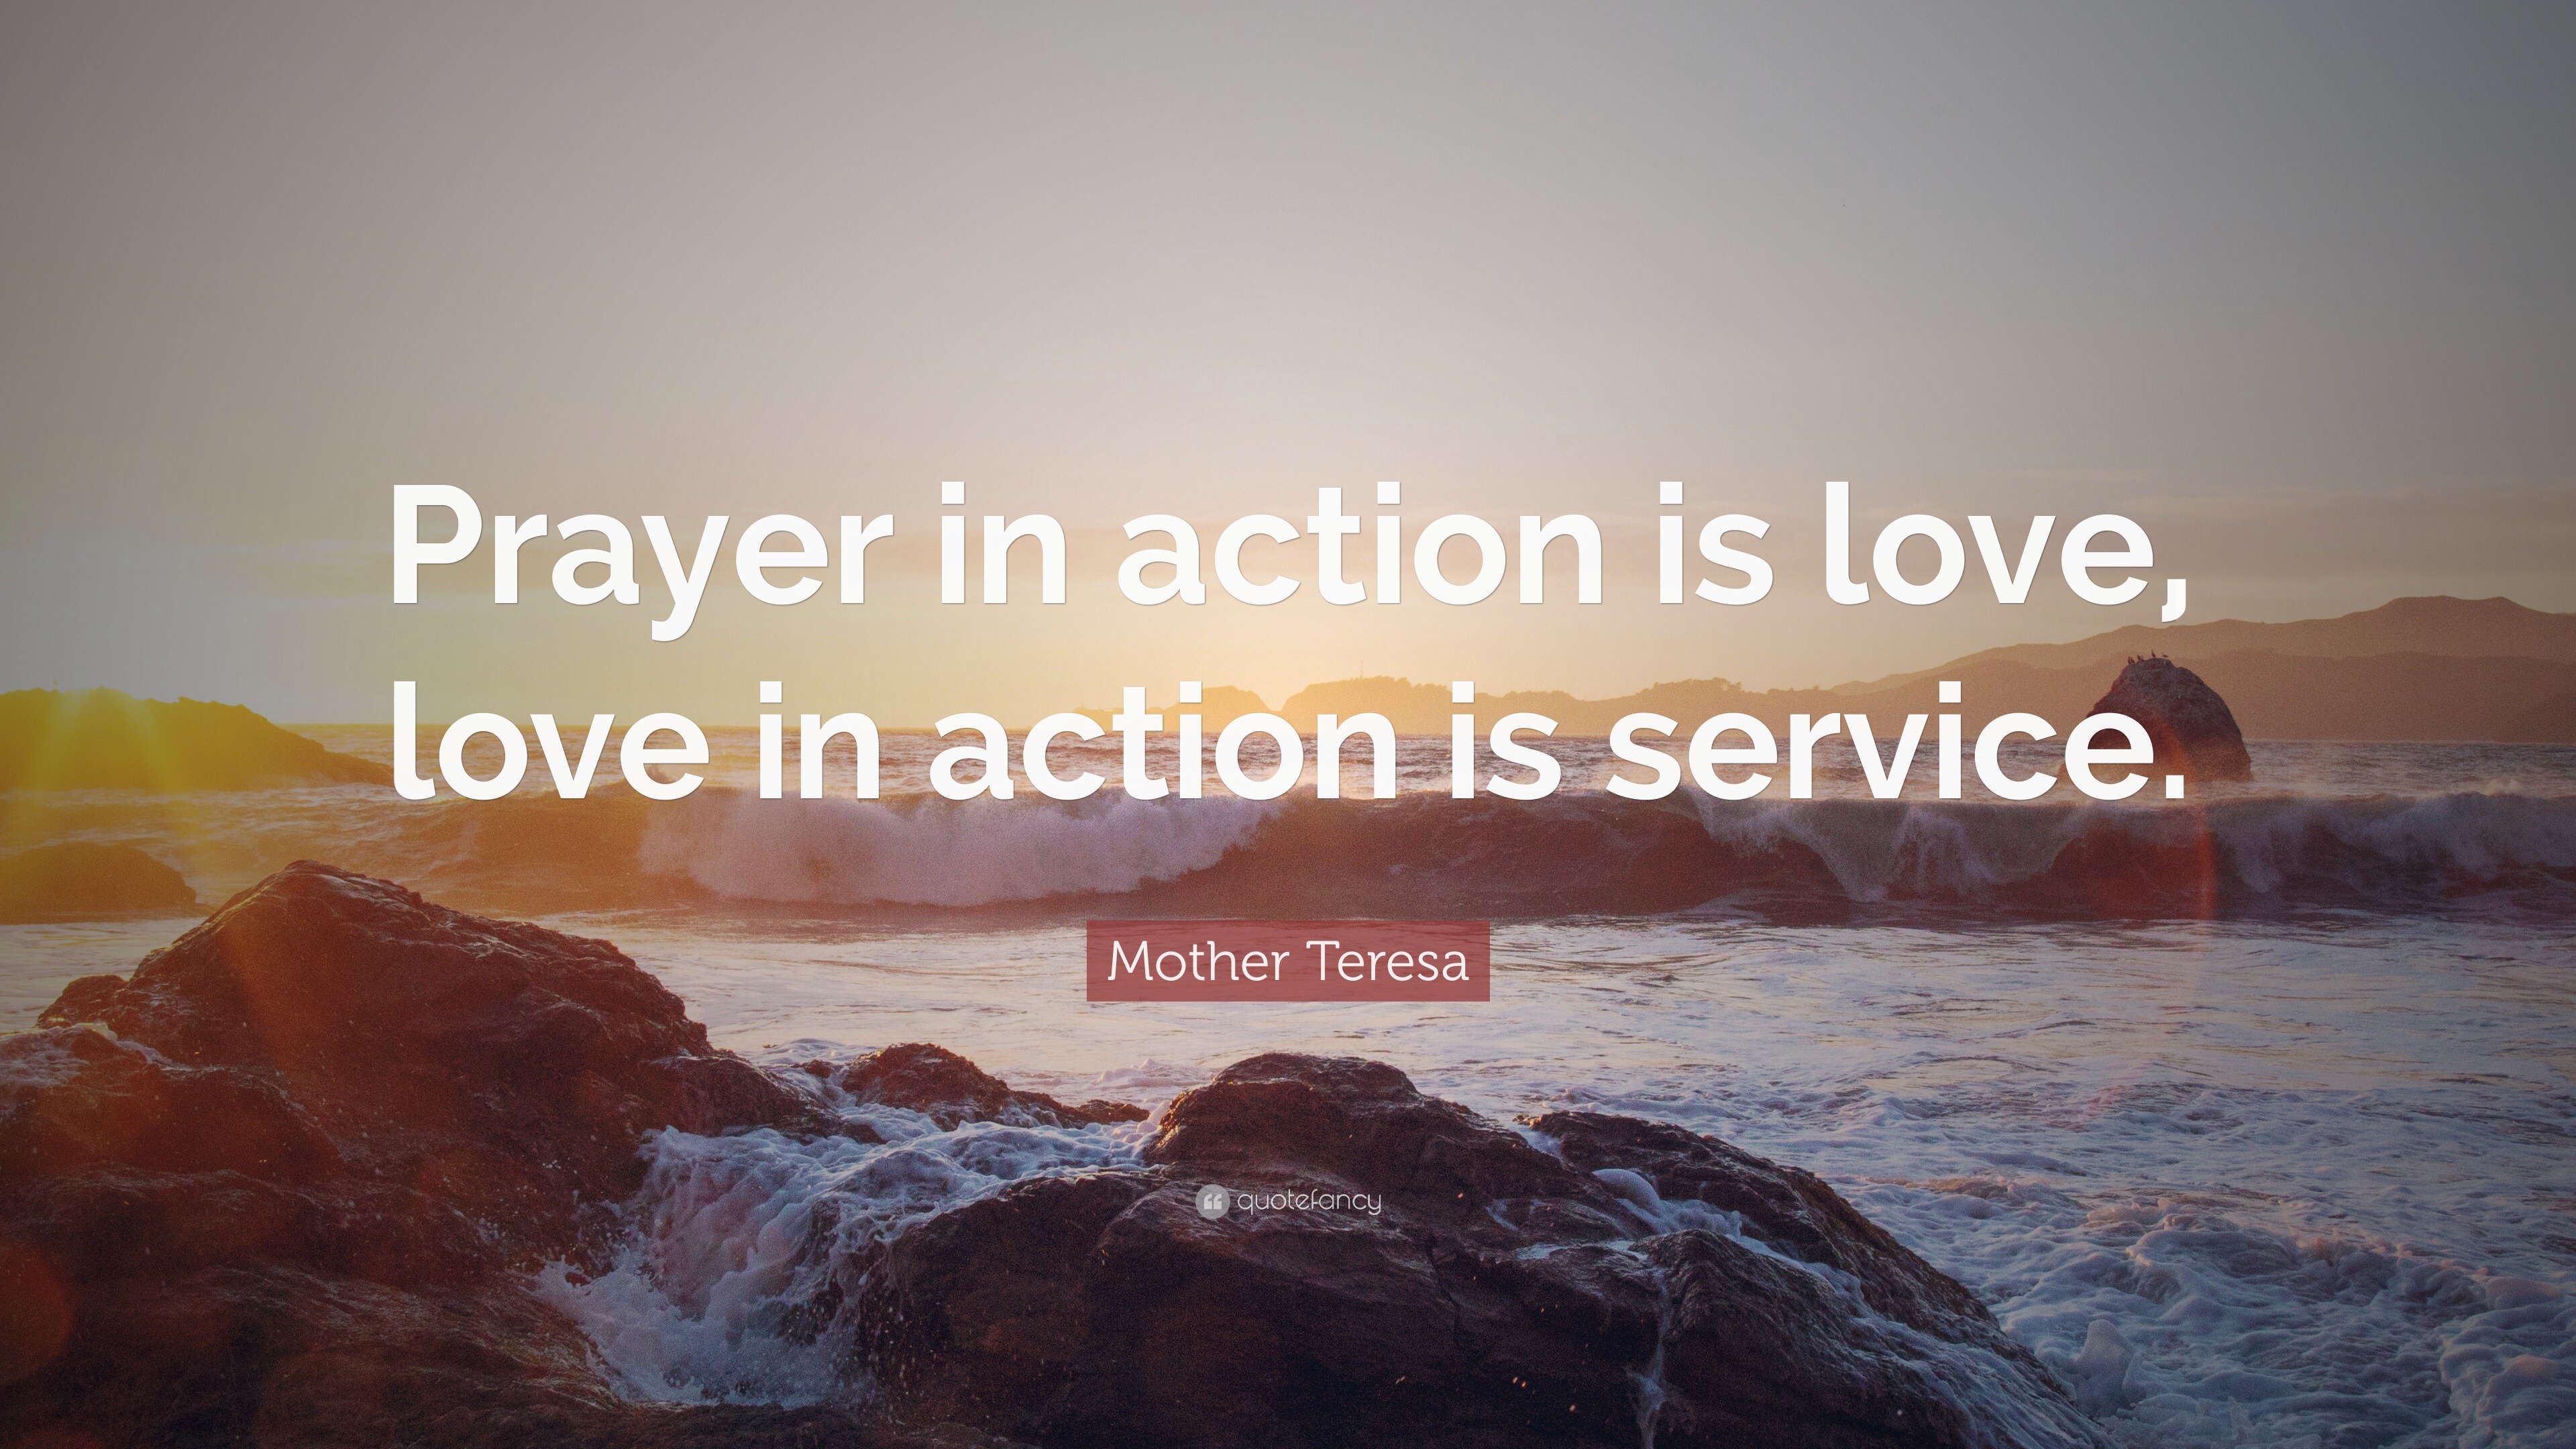 Mother Teresa Quote “Prayer in action is love love in action is service